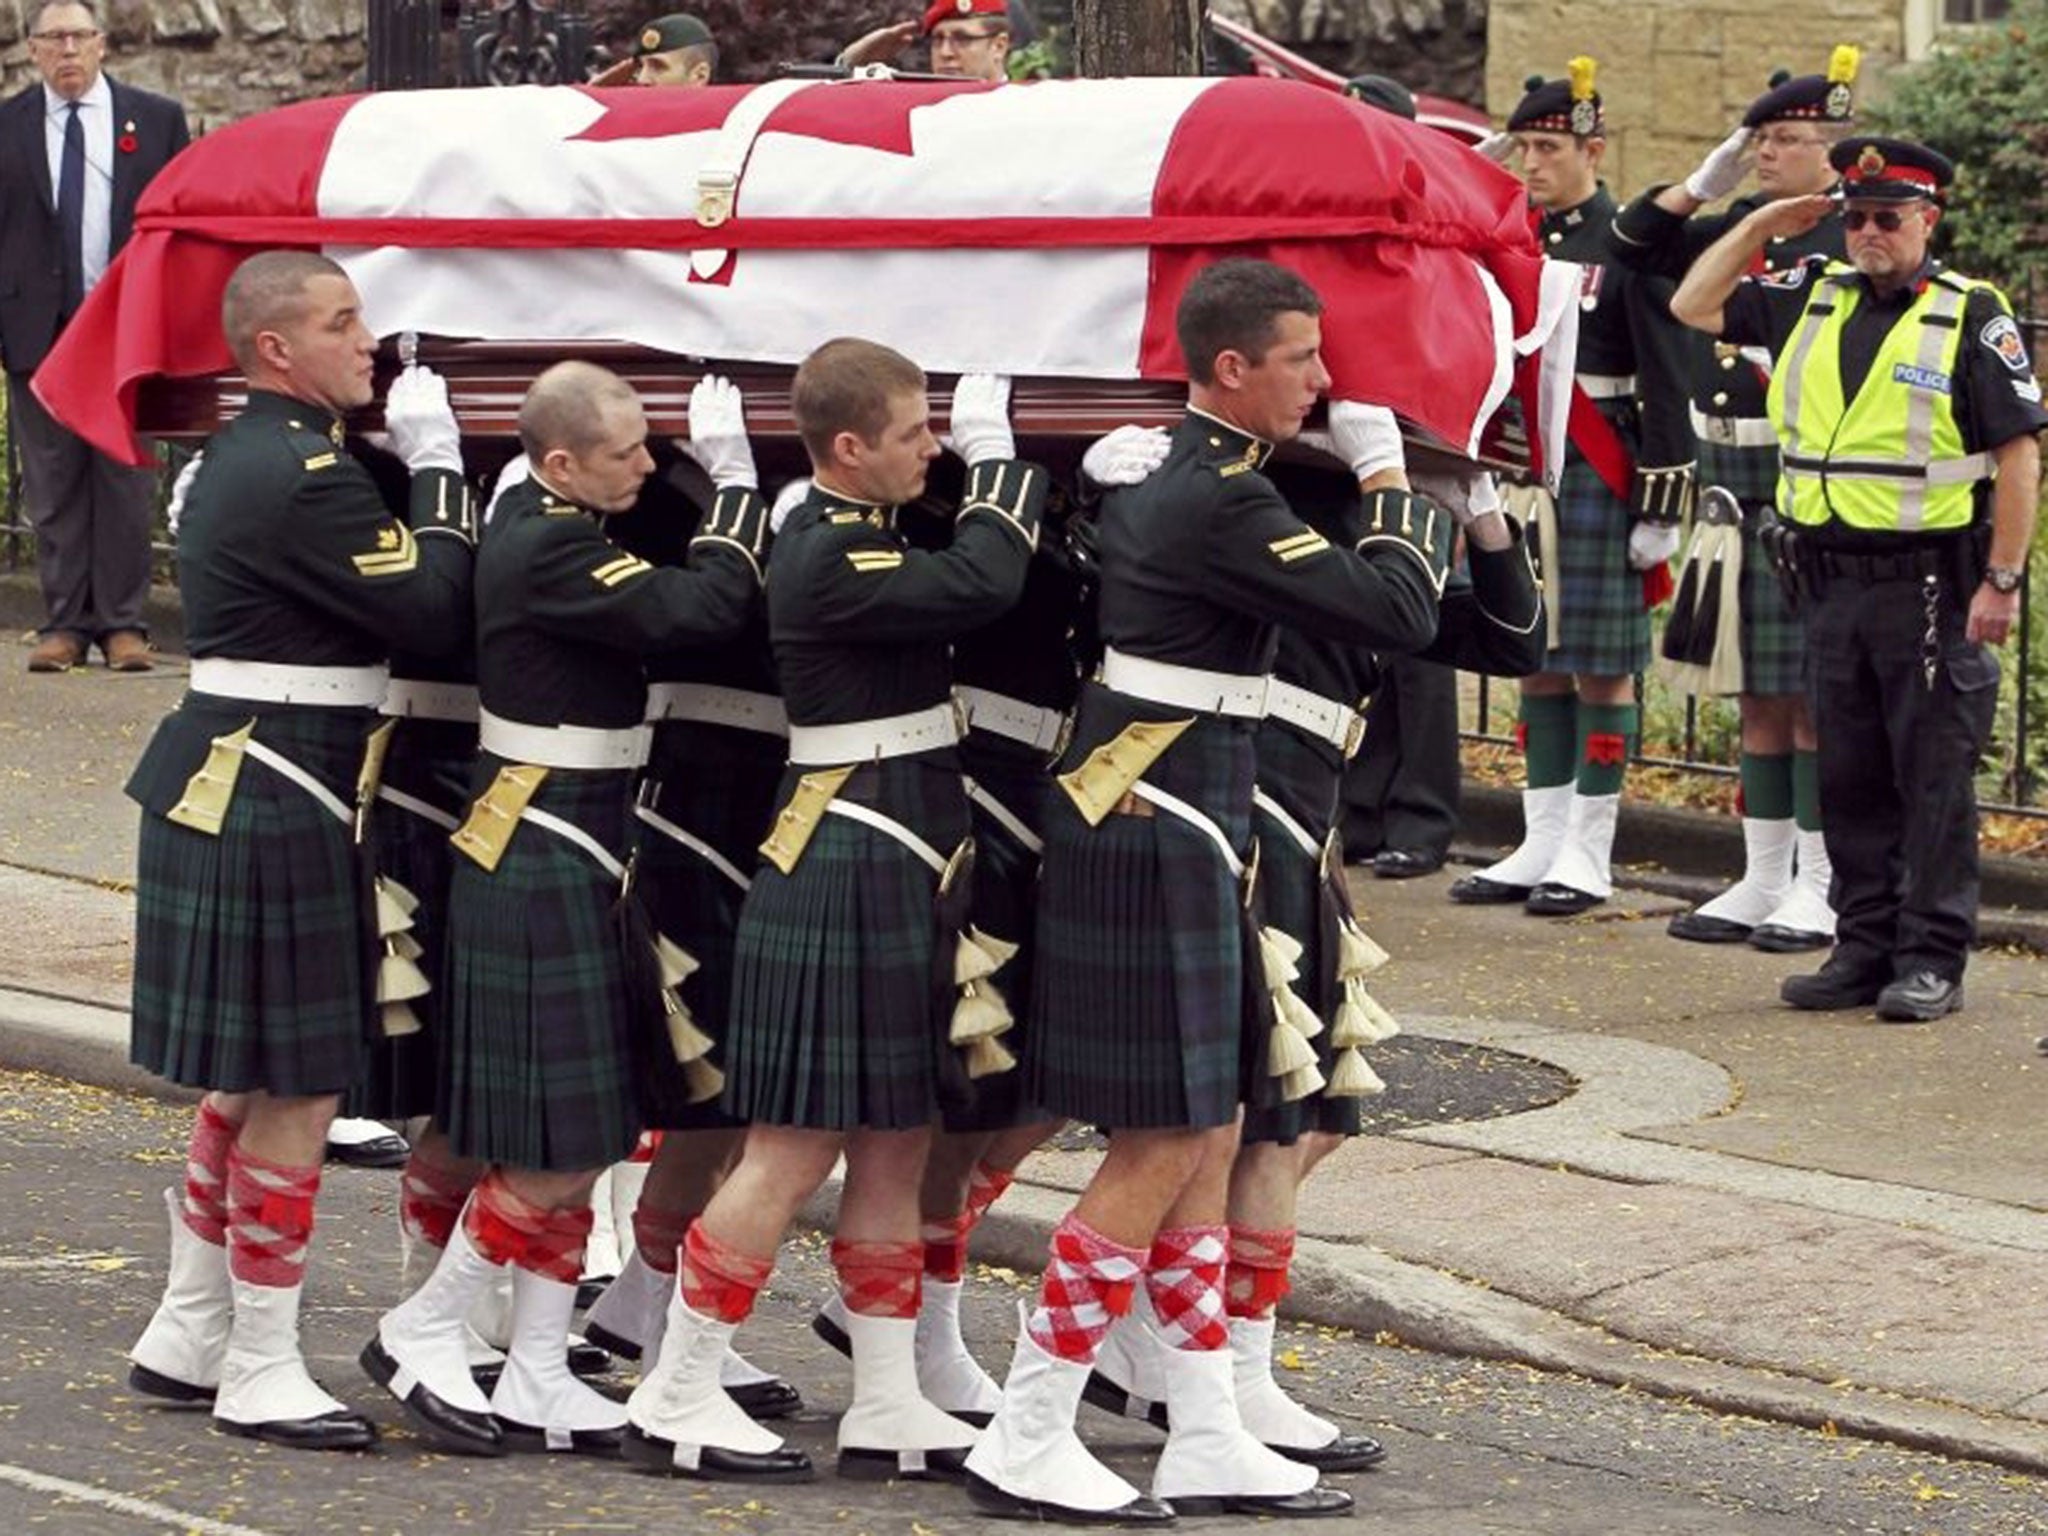 Soldiers carry the coffin into the church during the funeral for Cpl. Nathan Cirillo in Hamilton.